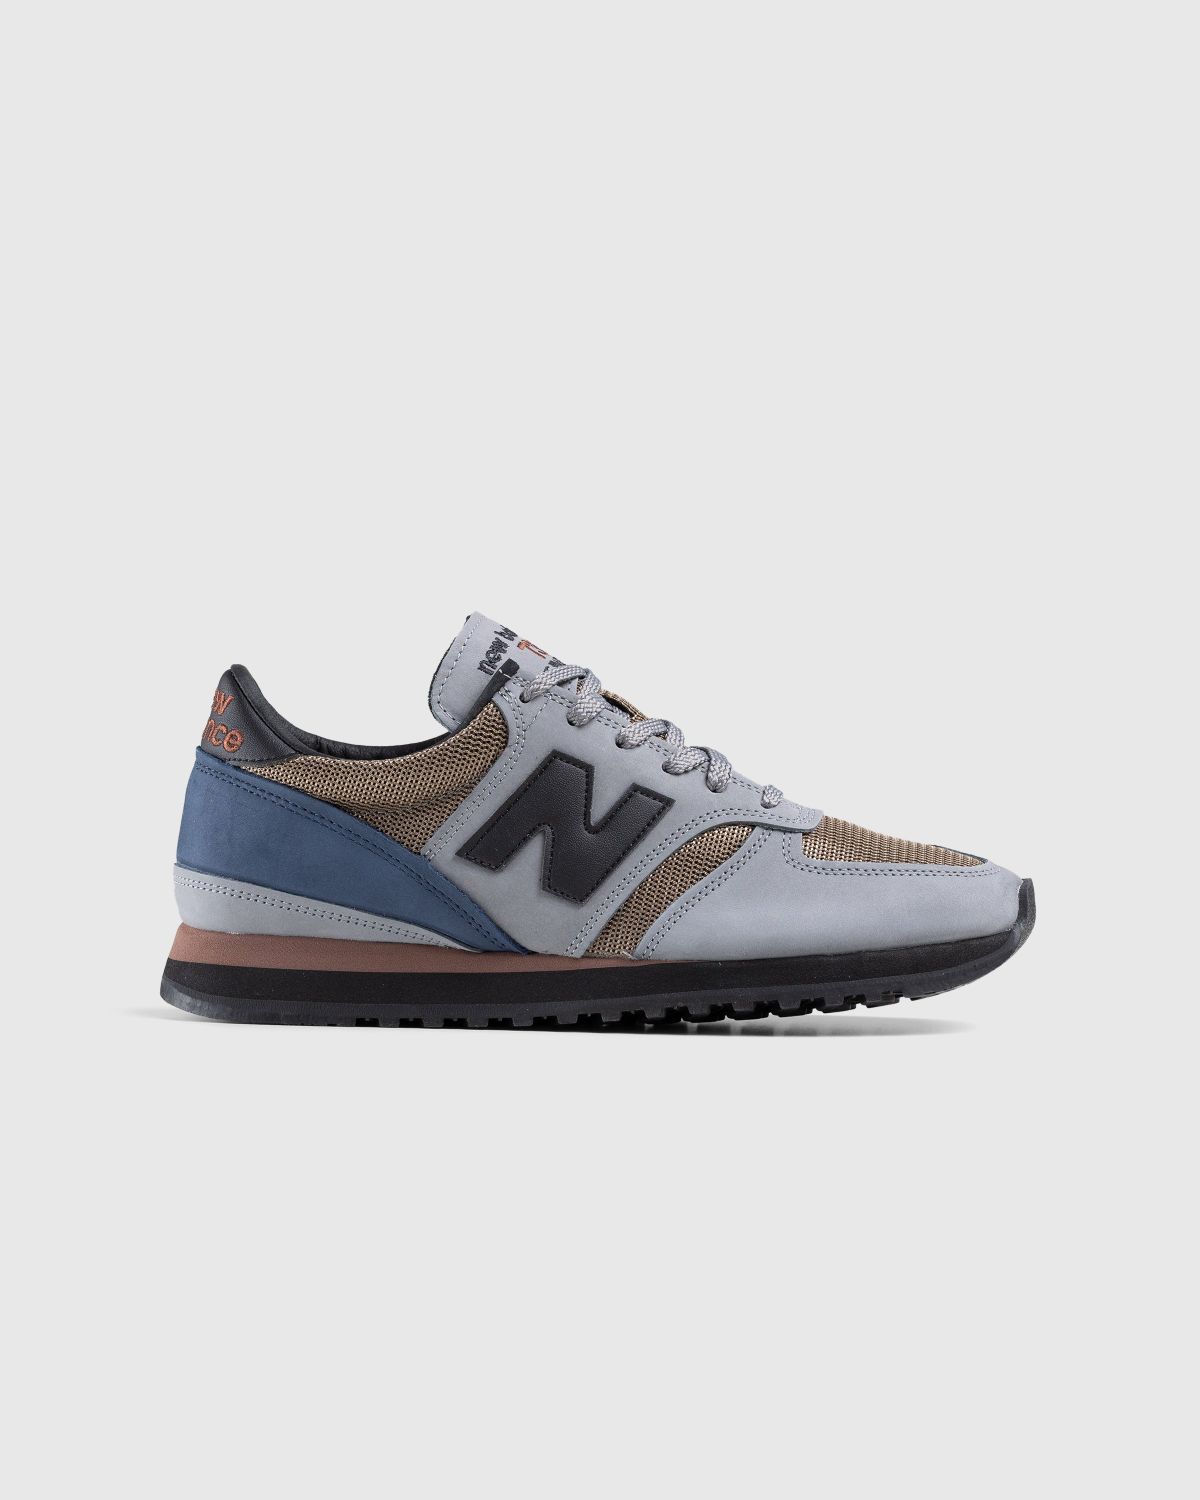 New Balance – M730INV Grey/Navy - Low Top Sneakers - Grey - Image 1